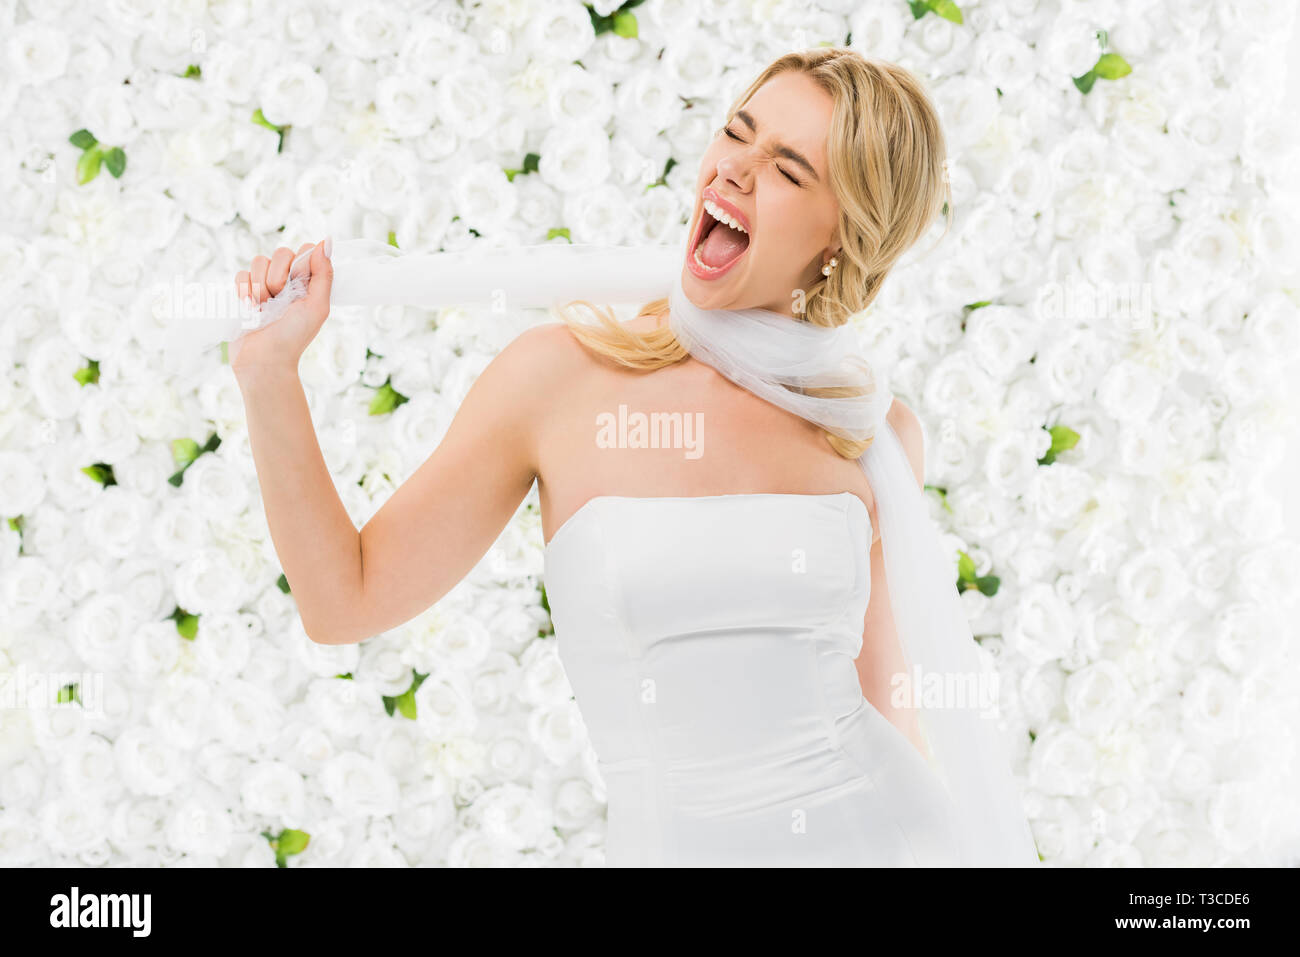 excited young woman winding bridal veil around neck on white floral background Stock Photo